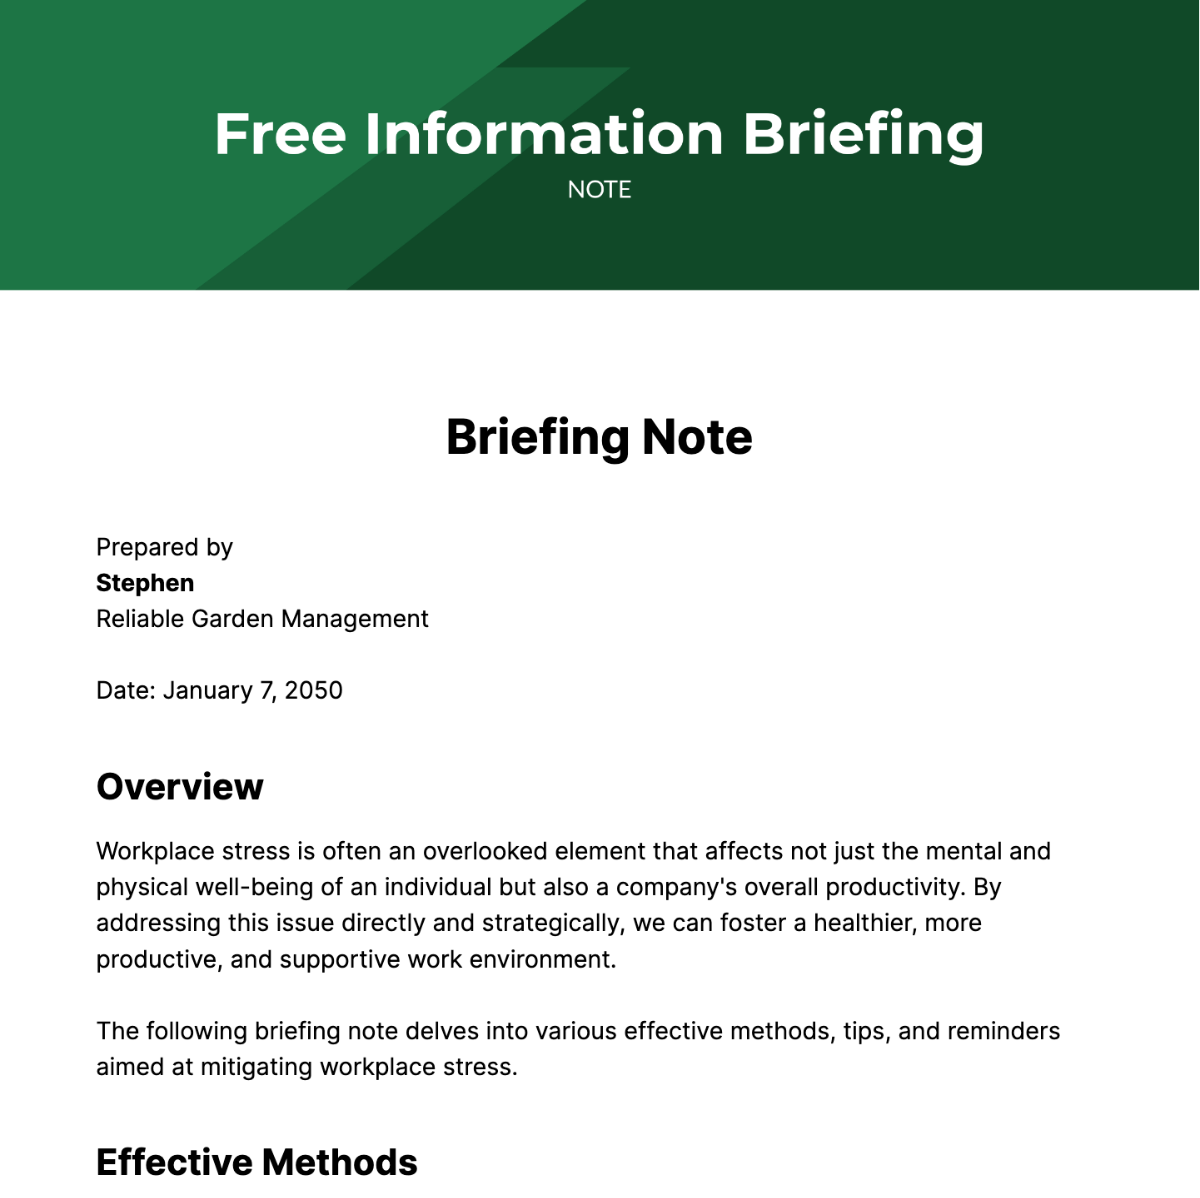 Free Information Briefing Note Template